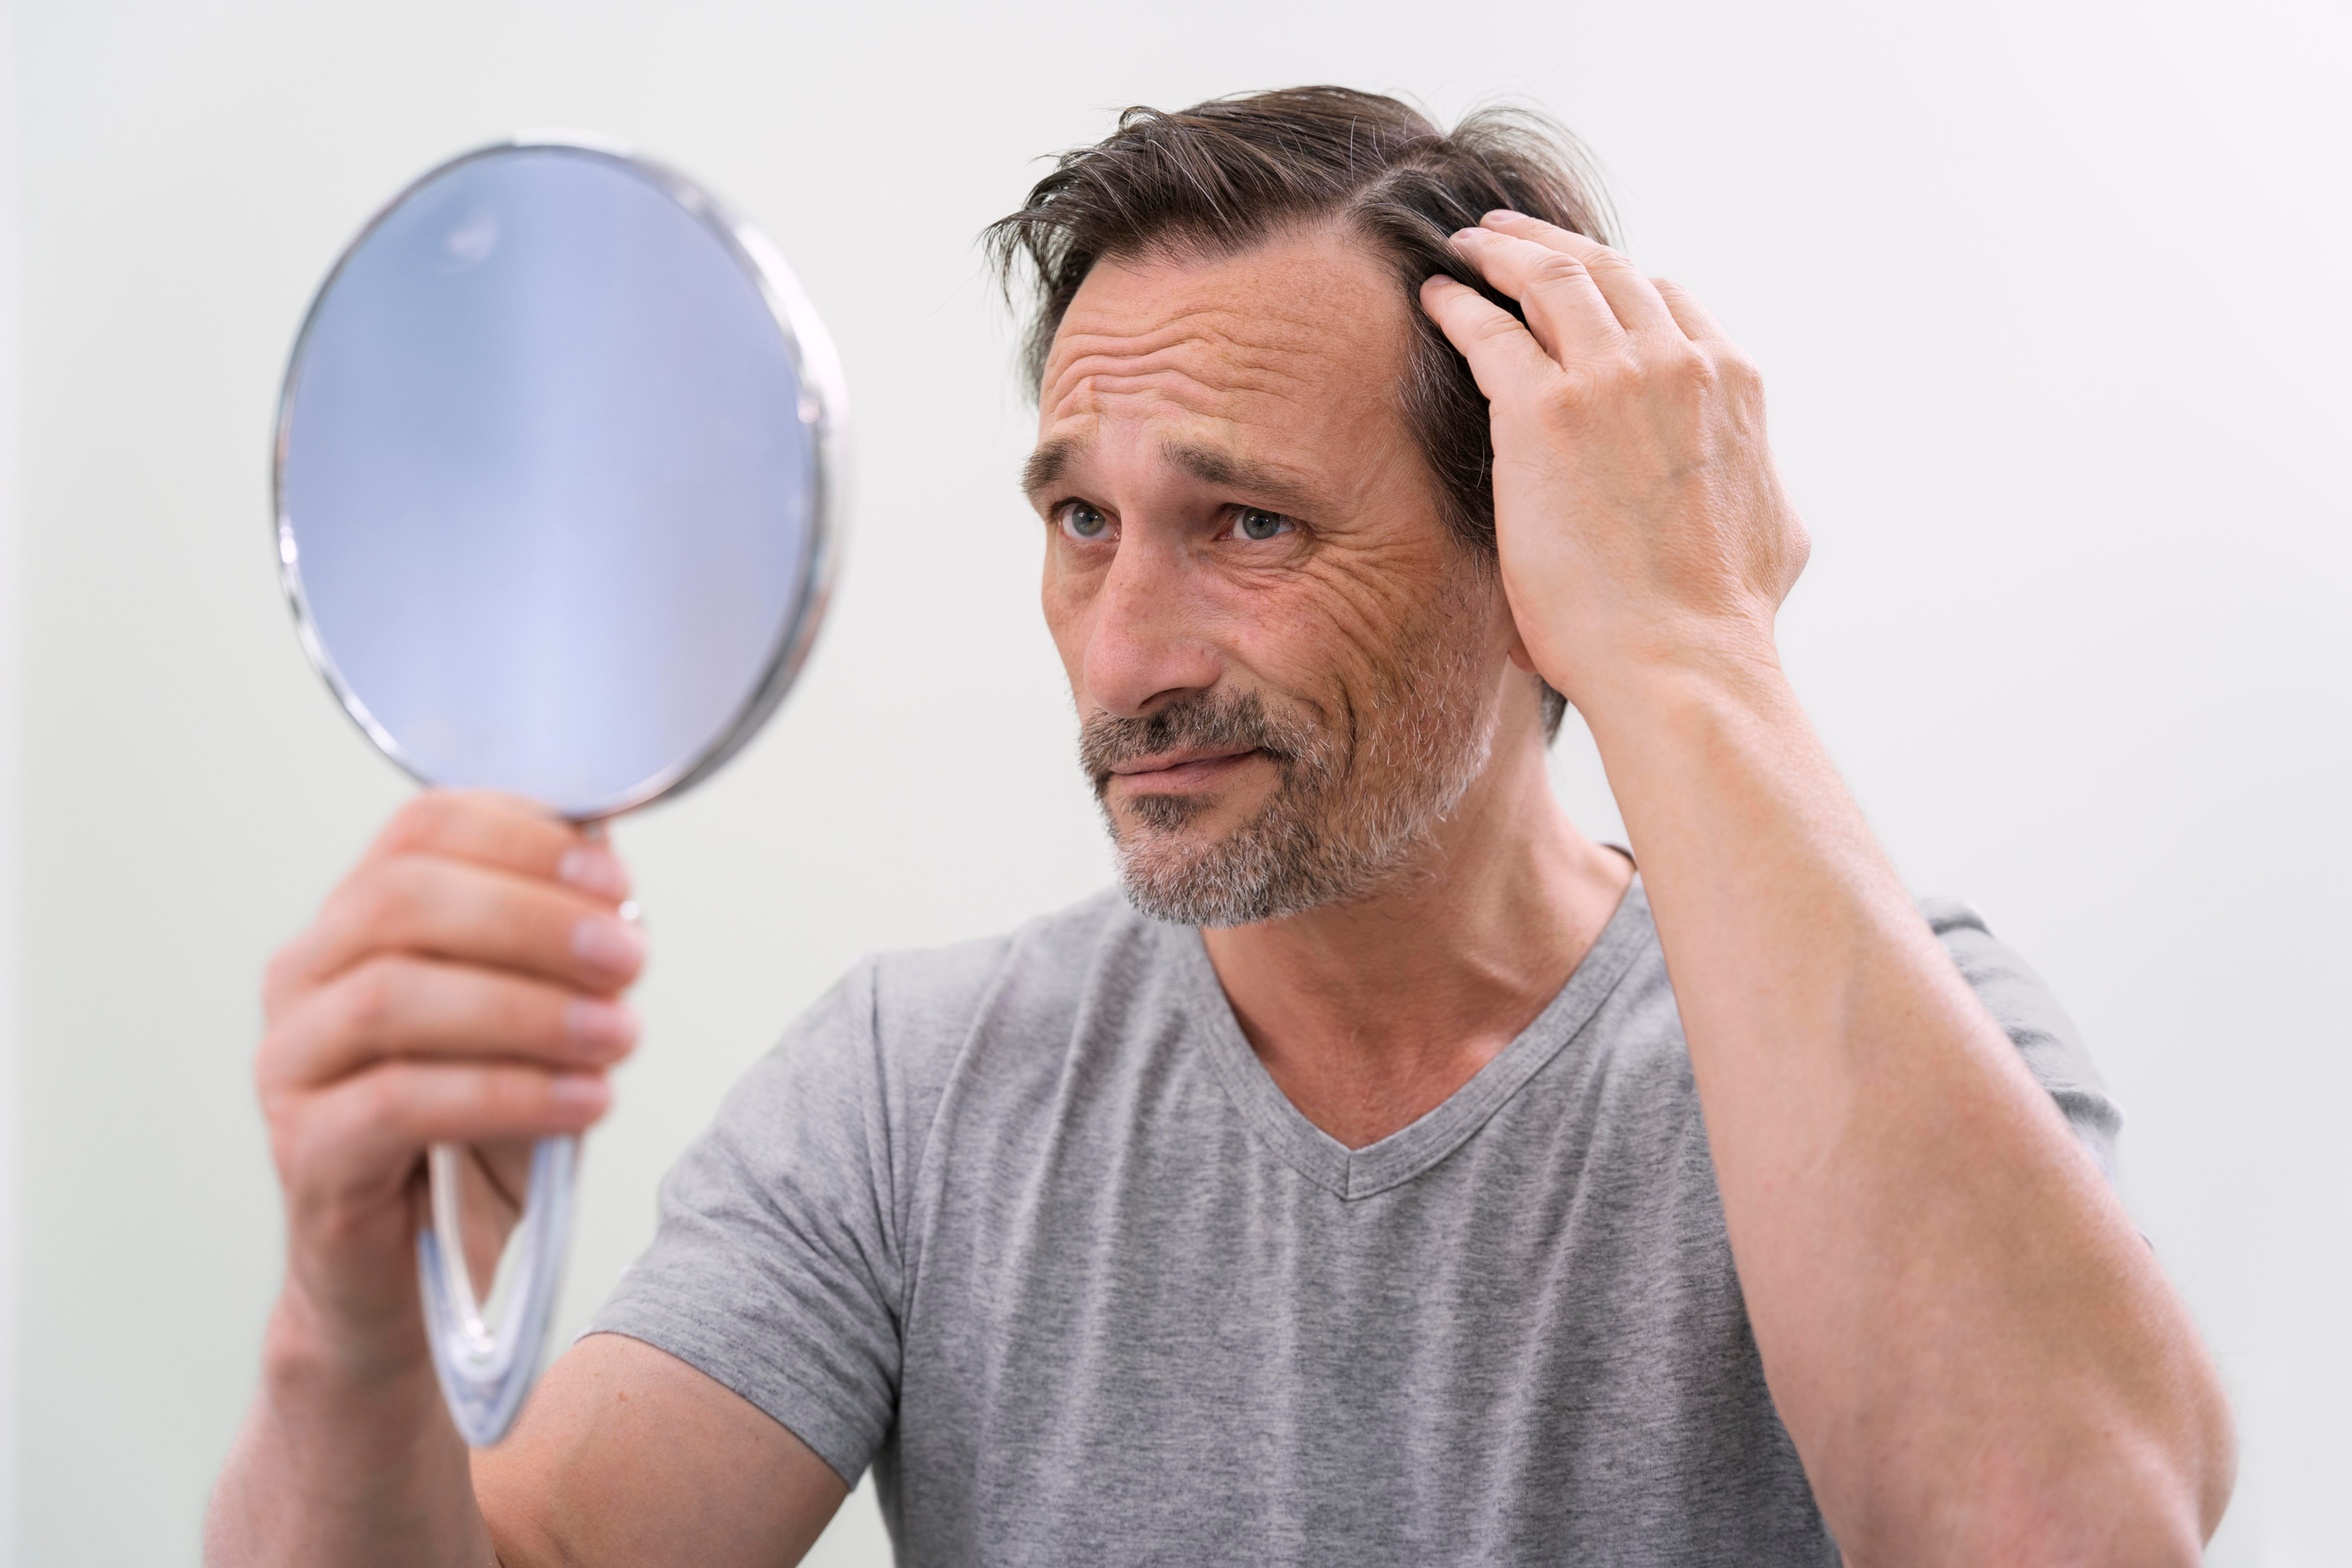 male pattern baldness is common especially for those without thicker hair find medical treatments and other ways to promote healthy hair